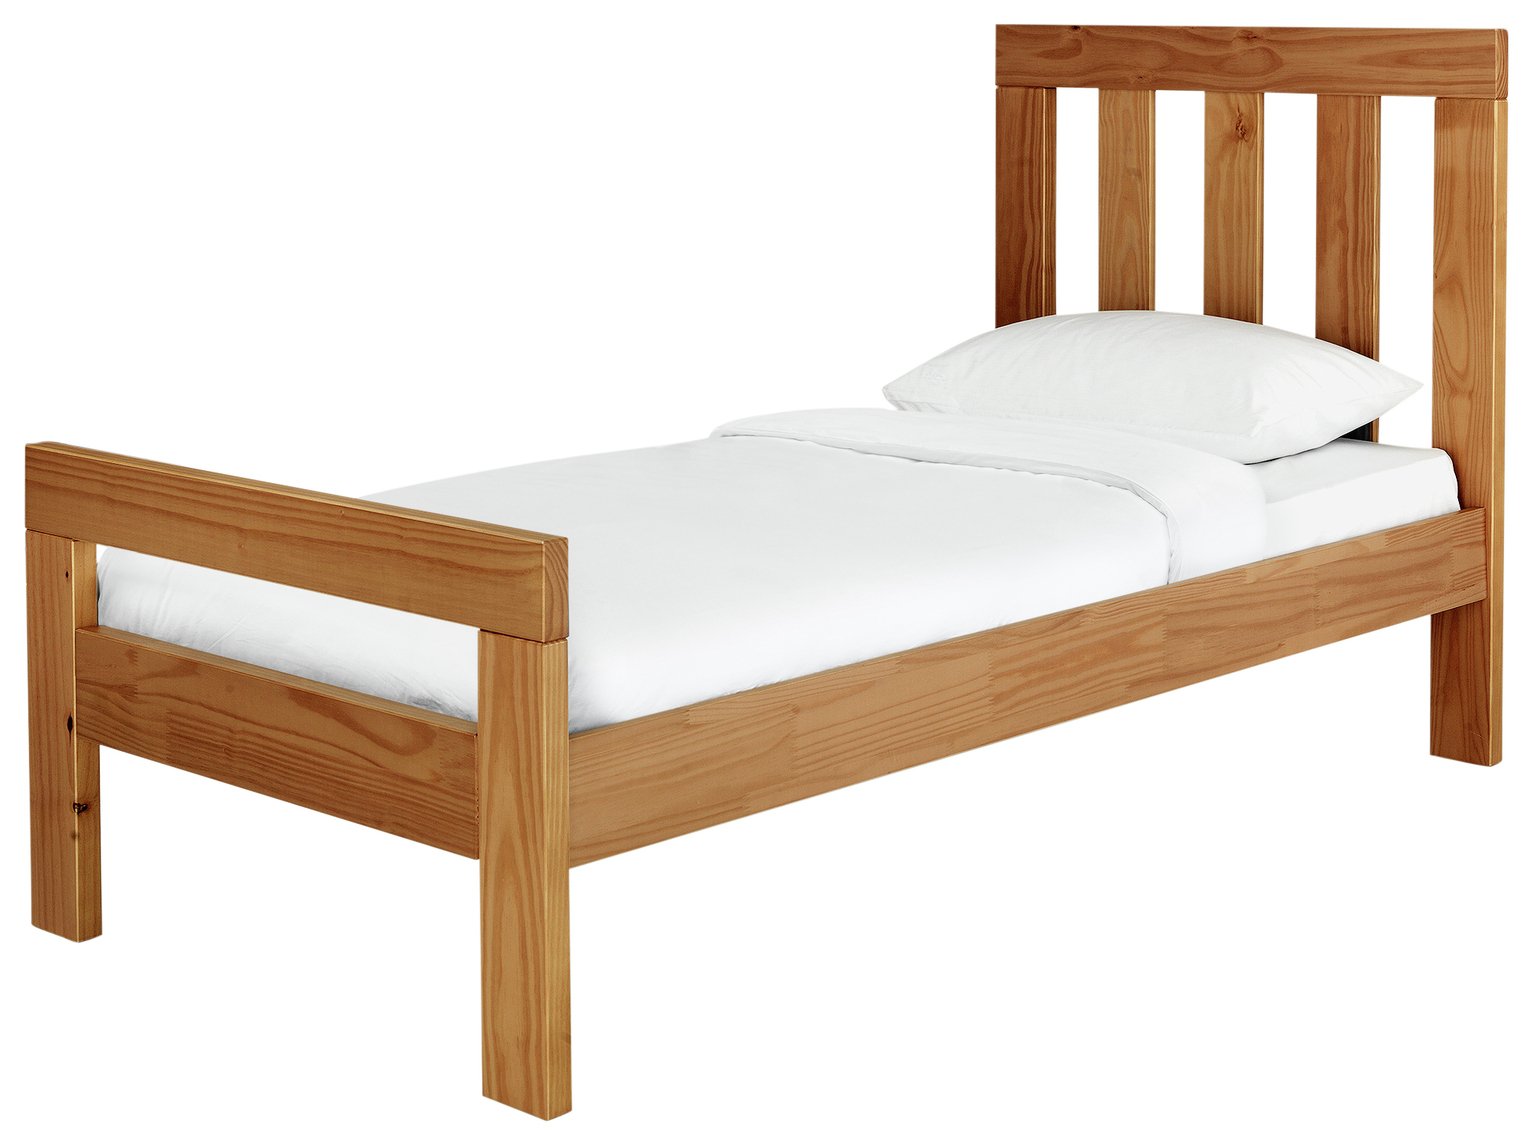 Argos Home Chile Single Bed Frame - Oak Stain